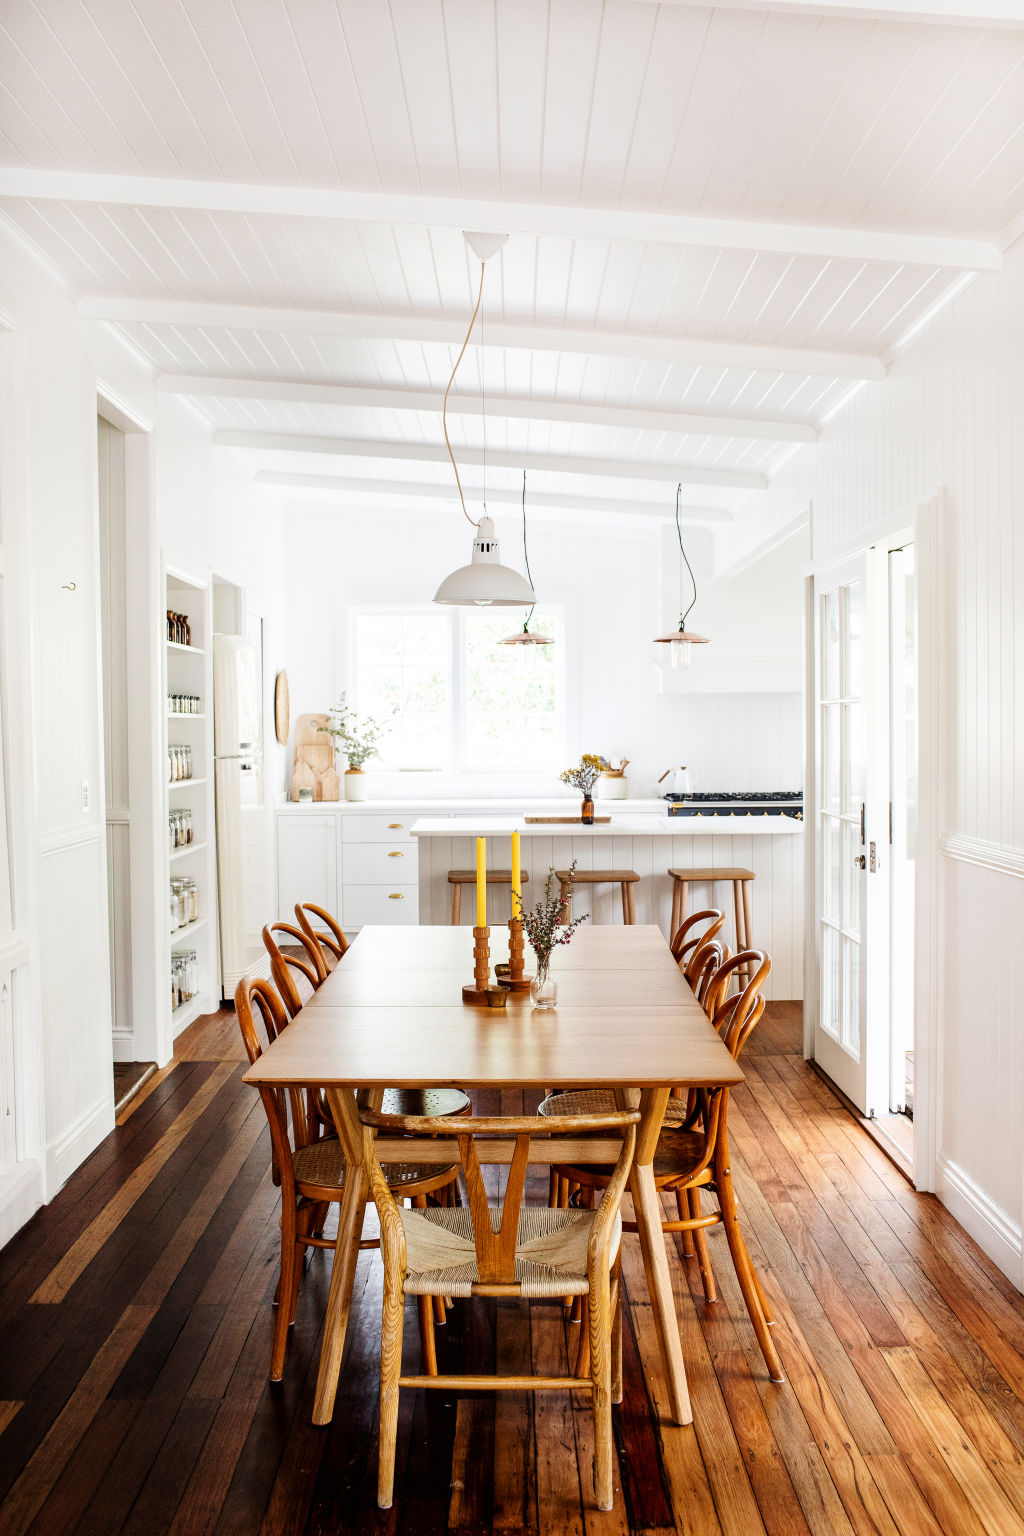 The dining room. Courtney and Michael bought the Wishbone chairs off the previous homeowner. Photo: Kara Rosenlund